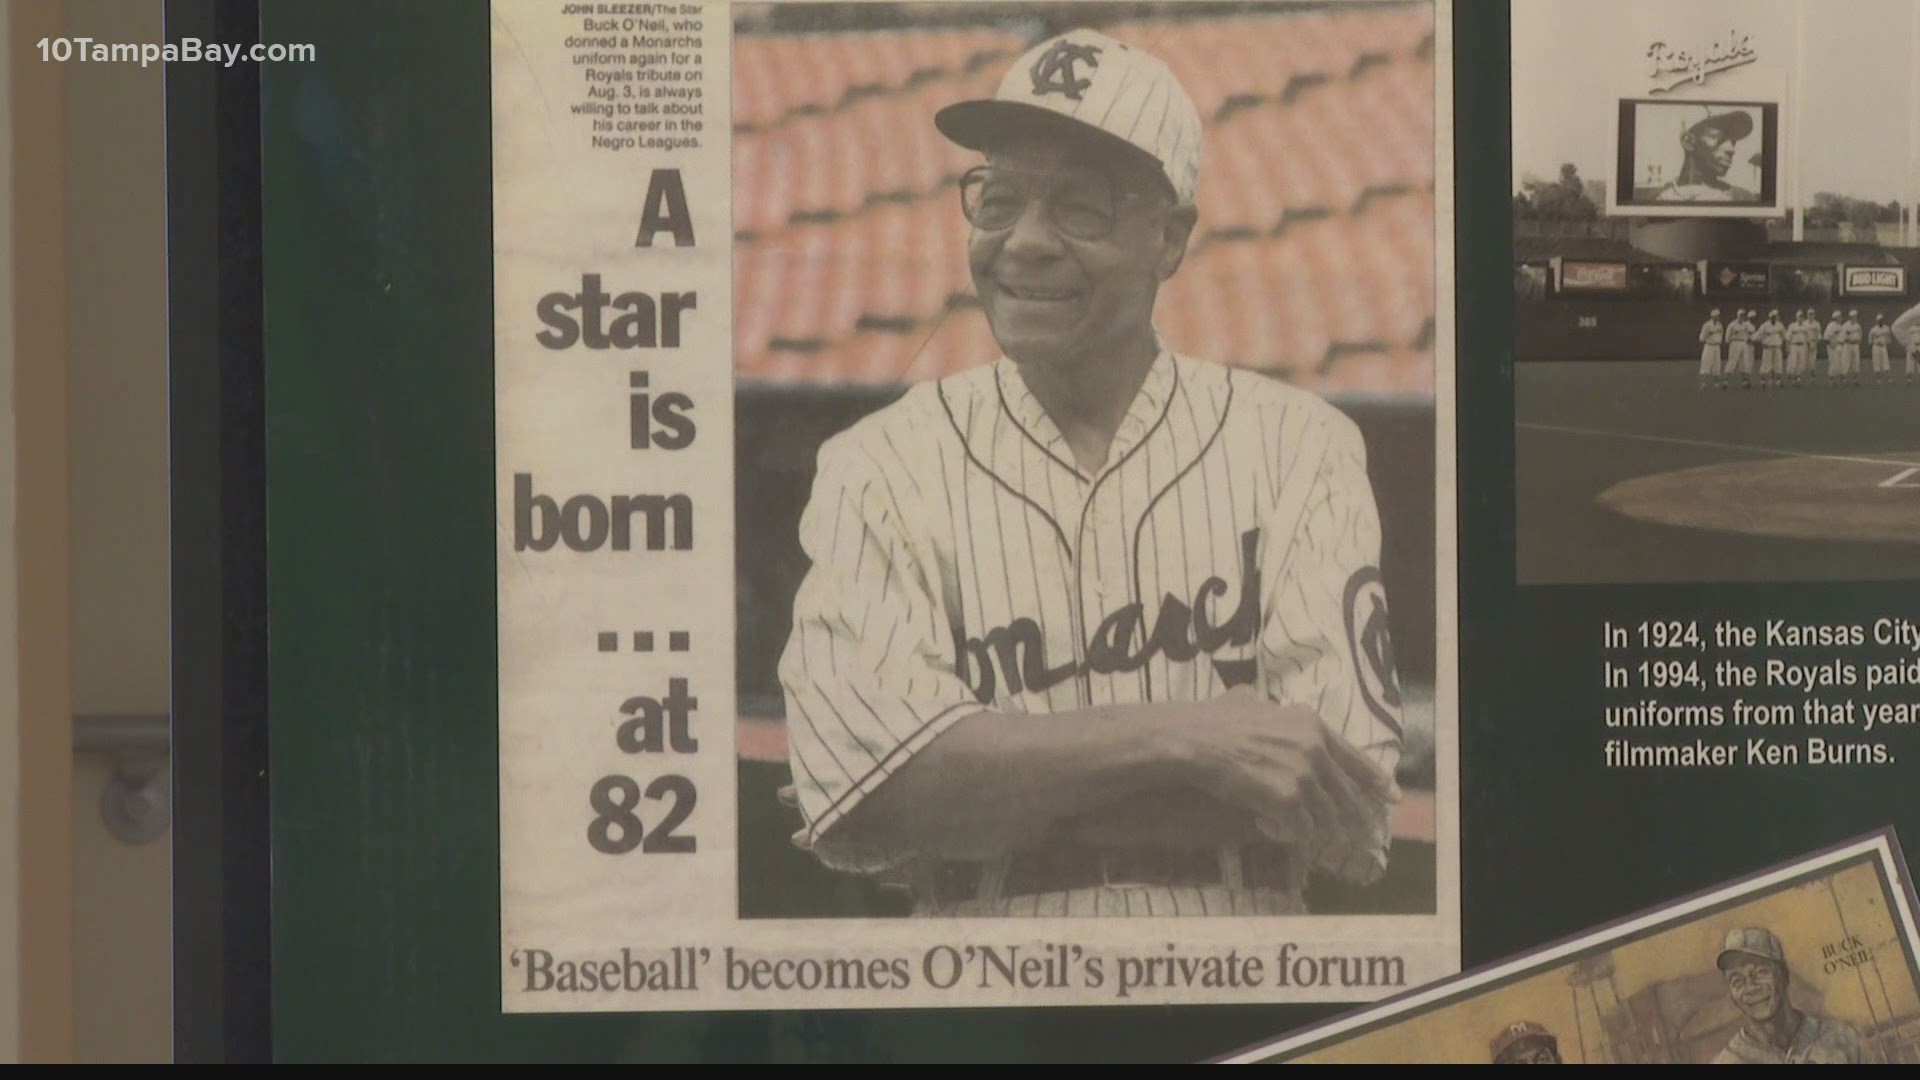 The Sarasota native is expected to become a member of the hall of fame not just because of his career as a player but for also becoming the MLB's first Black coach